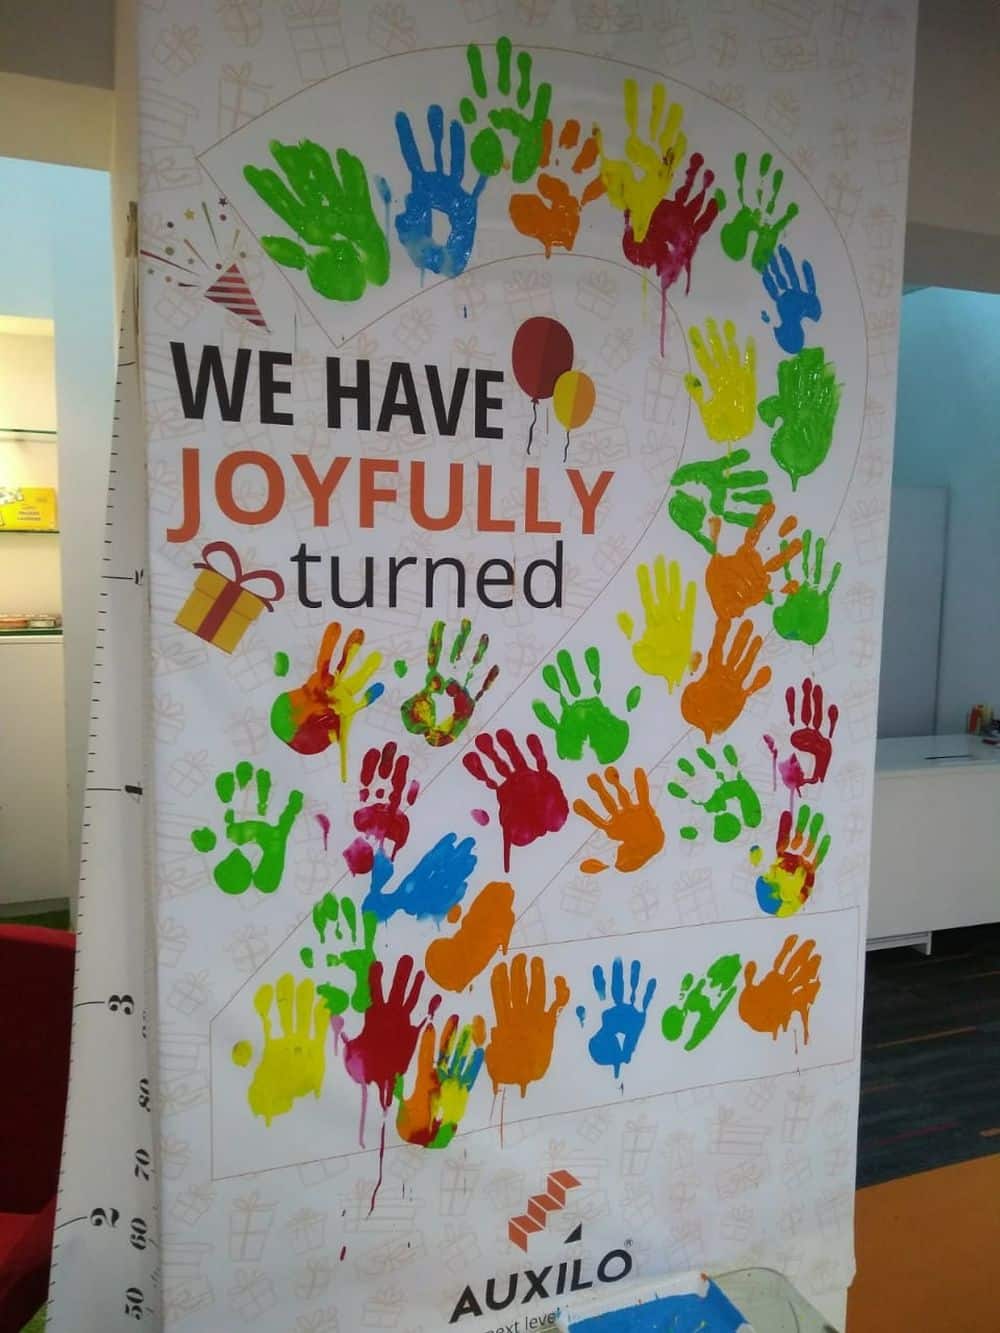 Celebration Event: Attendees celebrating a joyful moment together, capturing the essence of unity and happiness